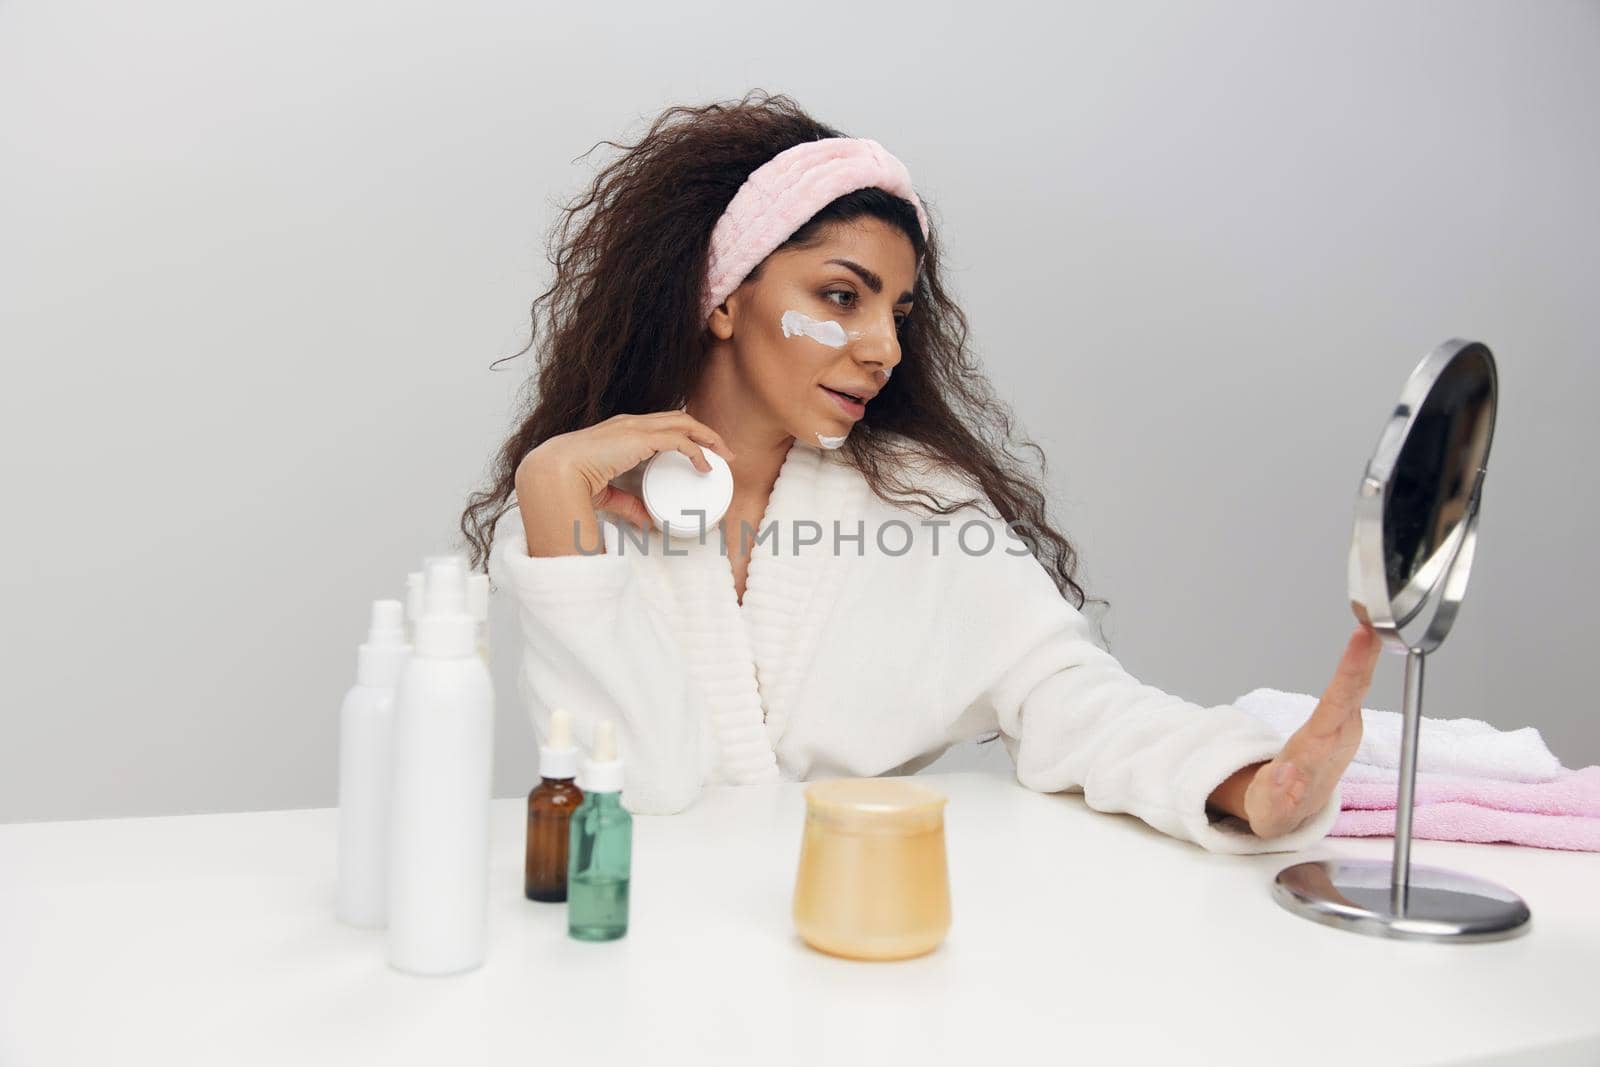 Lovely tanned pretty curly Latin lady admiring herself in mirror use facial cream doing beauty procedure in white home interior. Copy space. MIRROR, MIRROR, ON THE WALL, WHO IS THE FAIREST OF THEM ALL